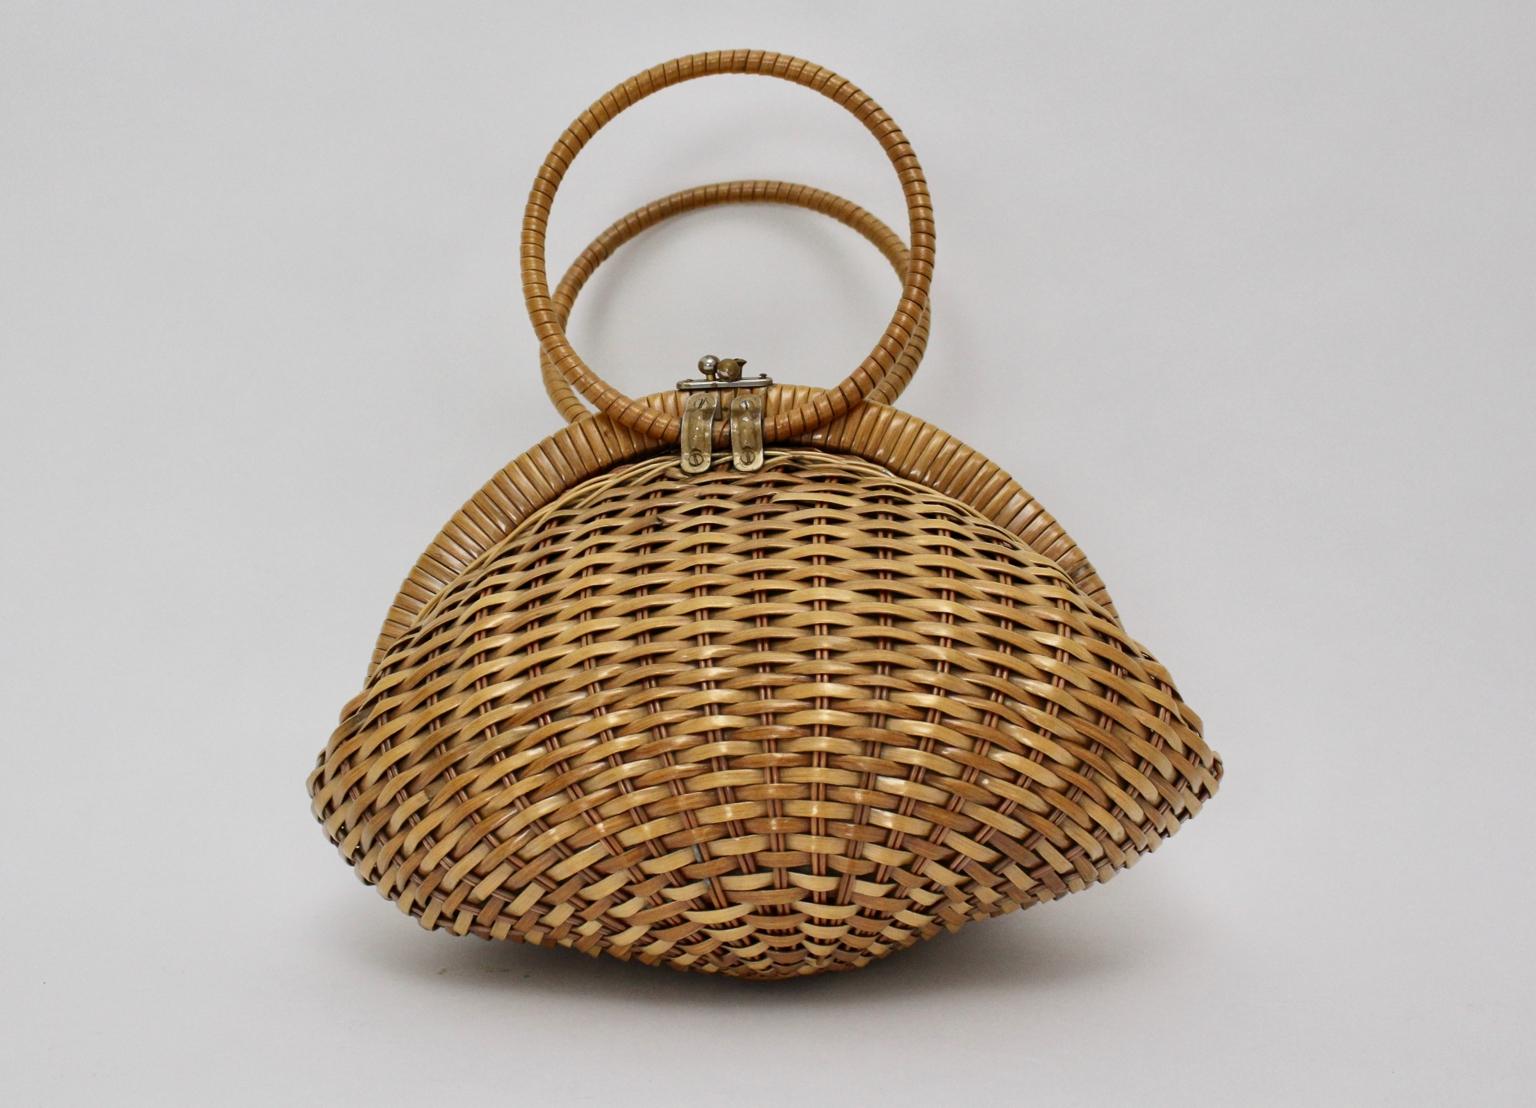 Lovely rattan handbag riviera style from the 1950s . 
Closing with a metal closure hook. 
The handbag features 2 round handles.
Inside lined with plastic with a side pocket.
The original condition is very good with minor signs of age and use.